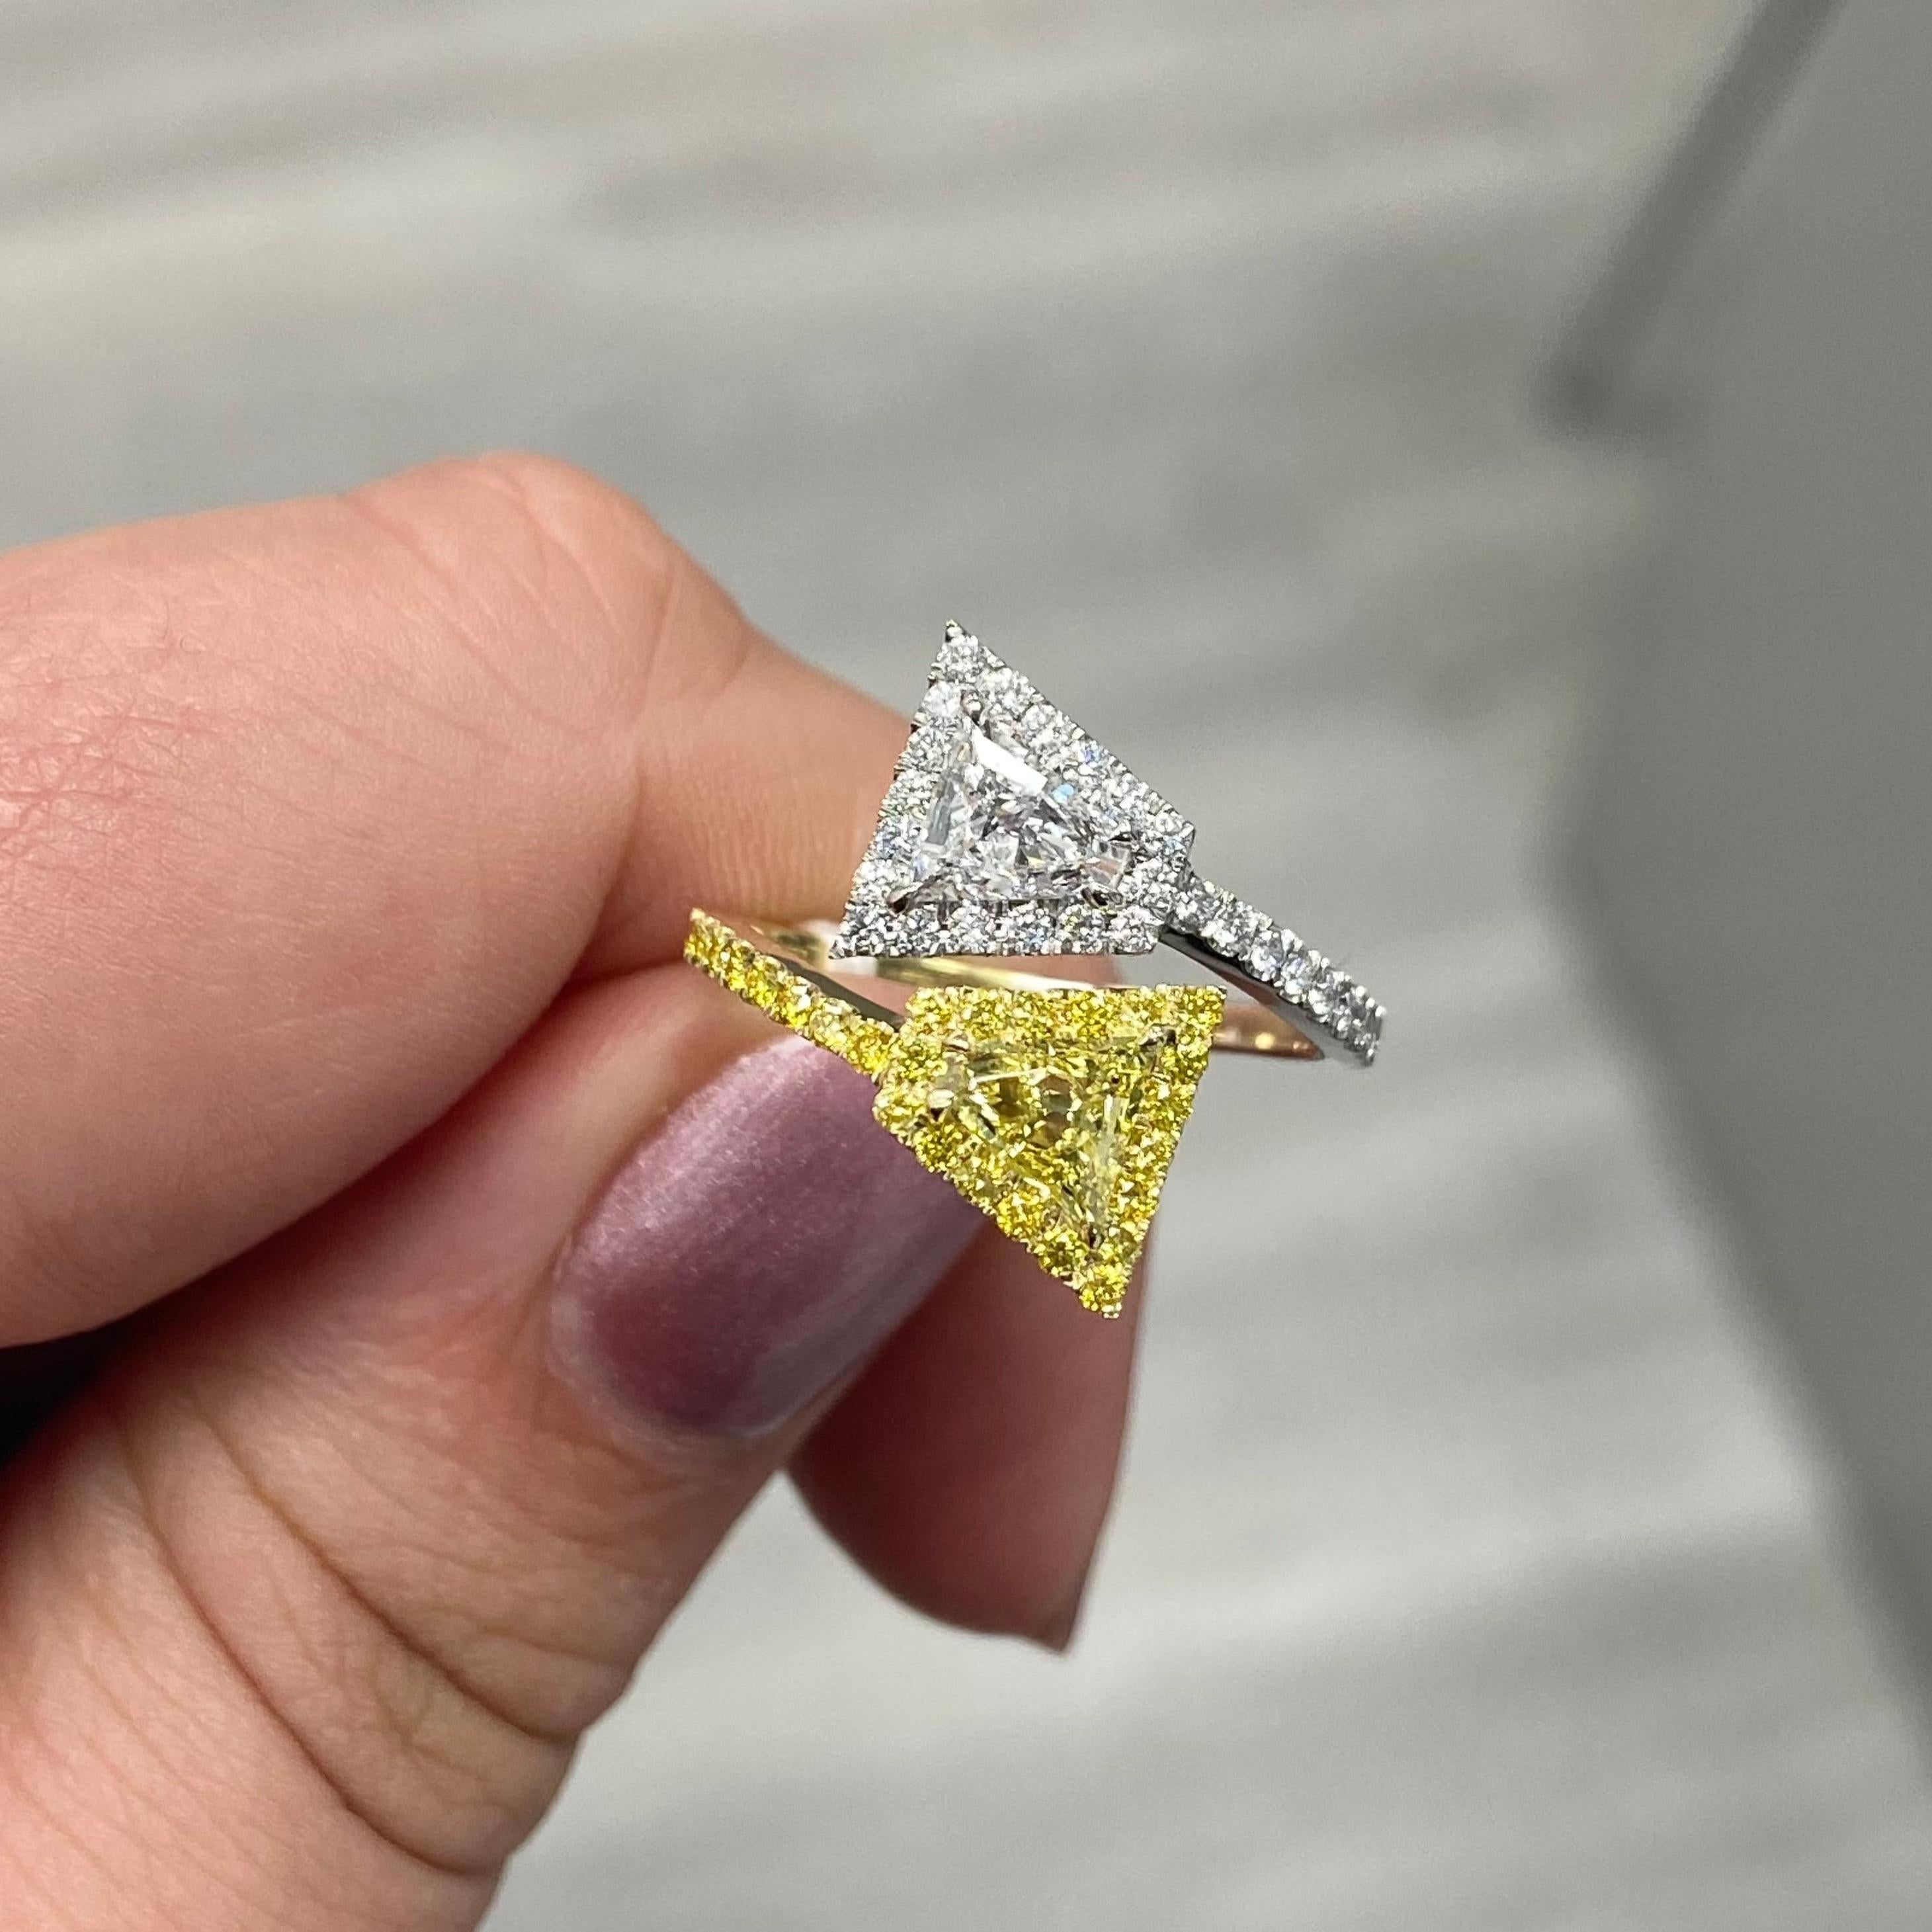 0.46 Carat Fancy Intense Yellow Trillion VS2
0.46 Carat F Trillion VS2
0.28 Carats surrounding
Handmade in NYC
Set in Platinum & 18k Yellow Gold

Making Extraordinary Attainable with Rare Colors
